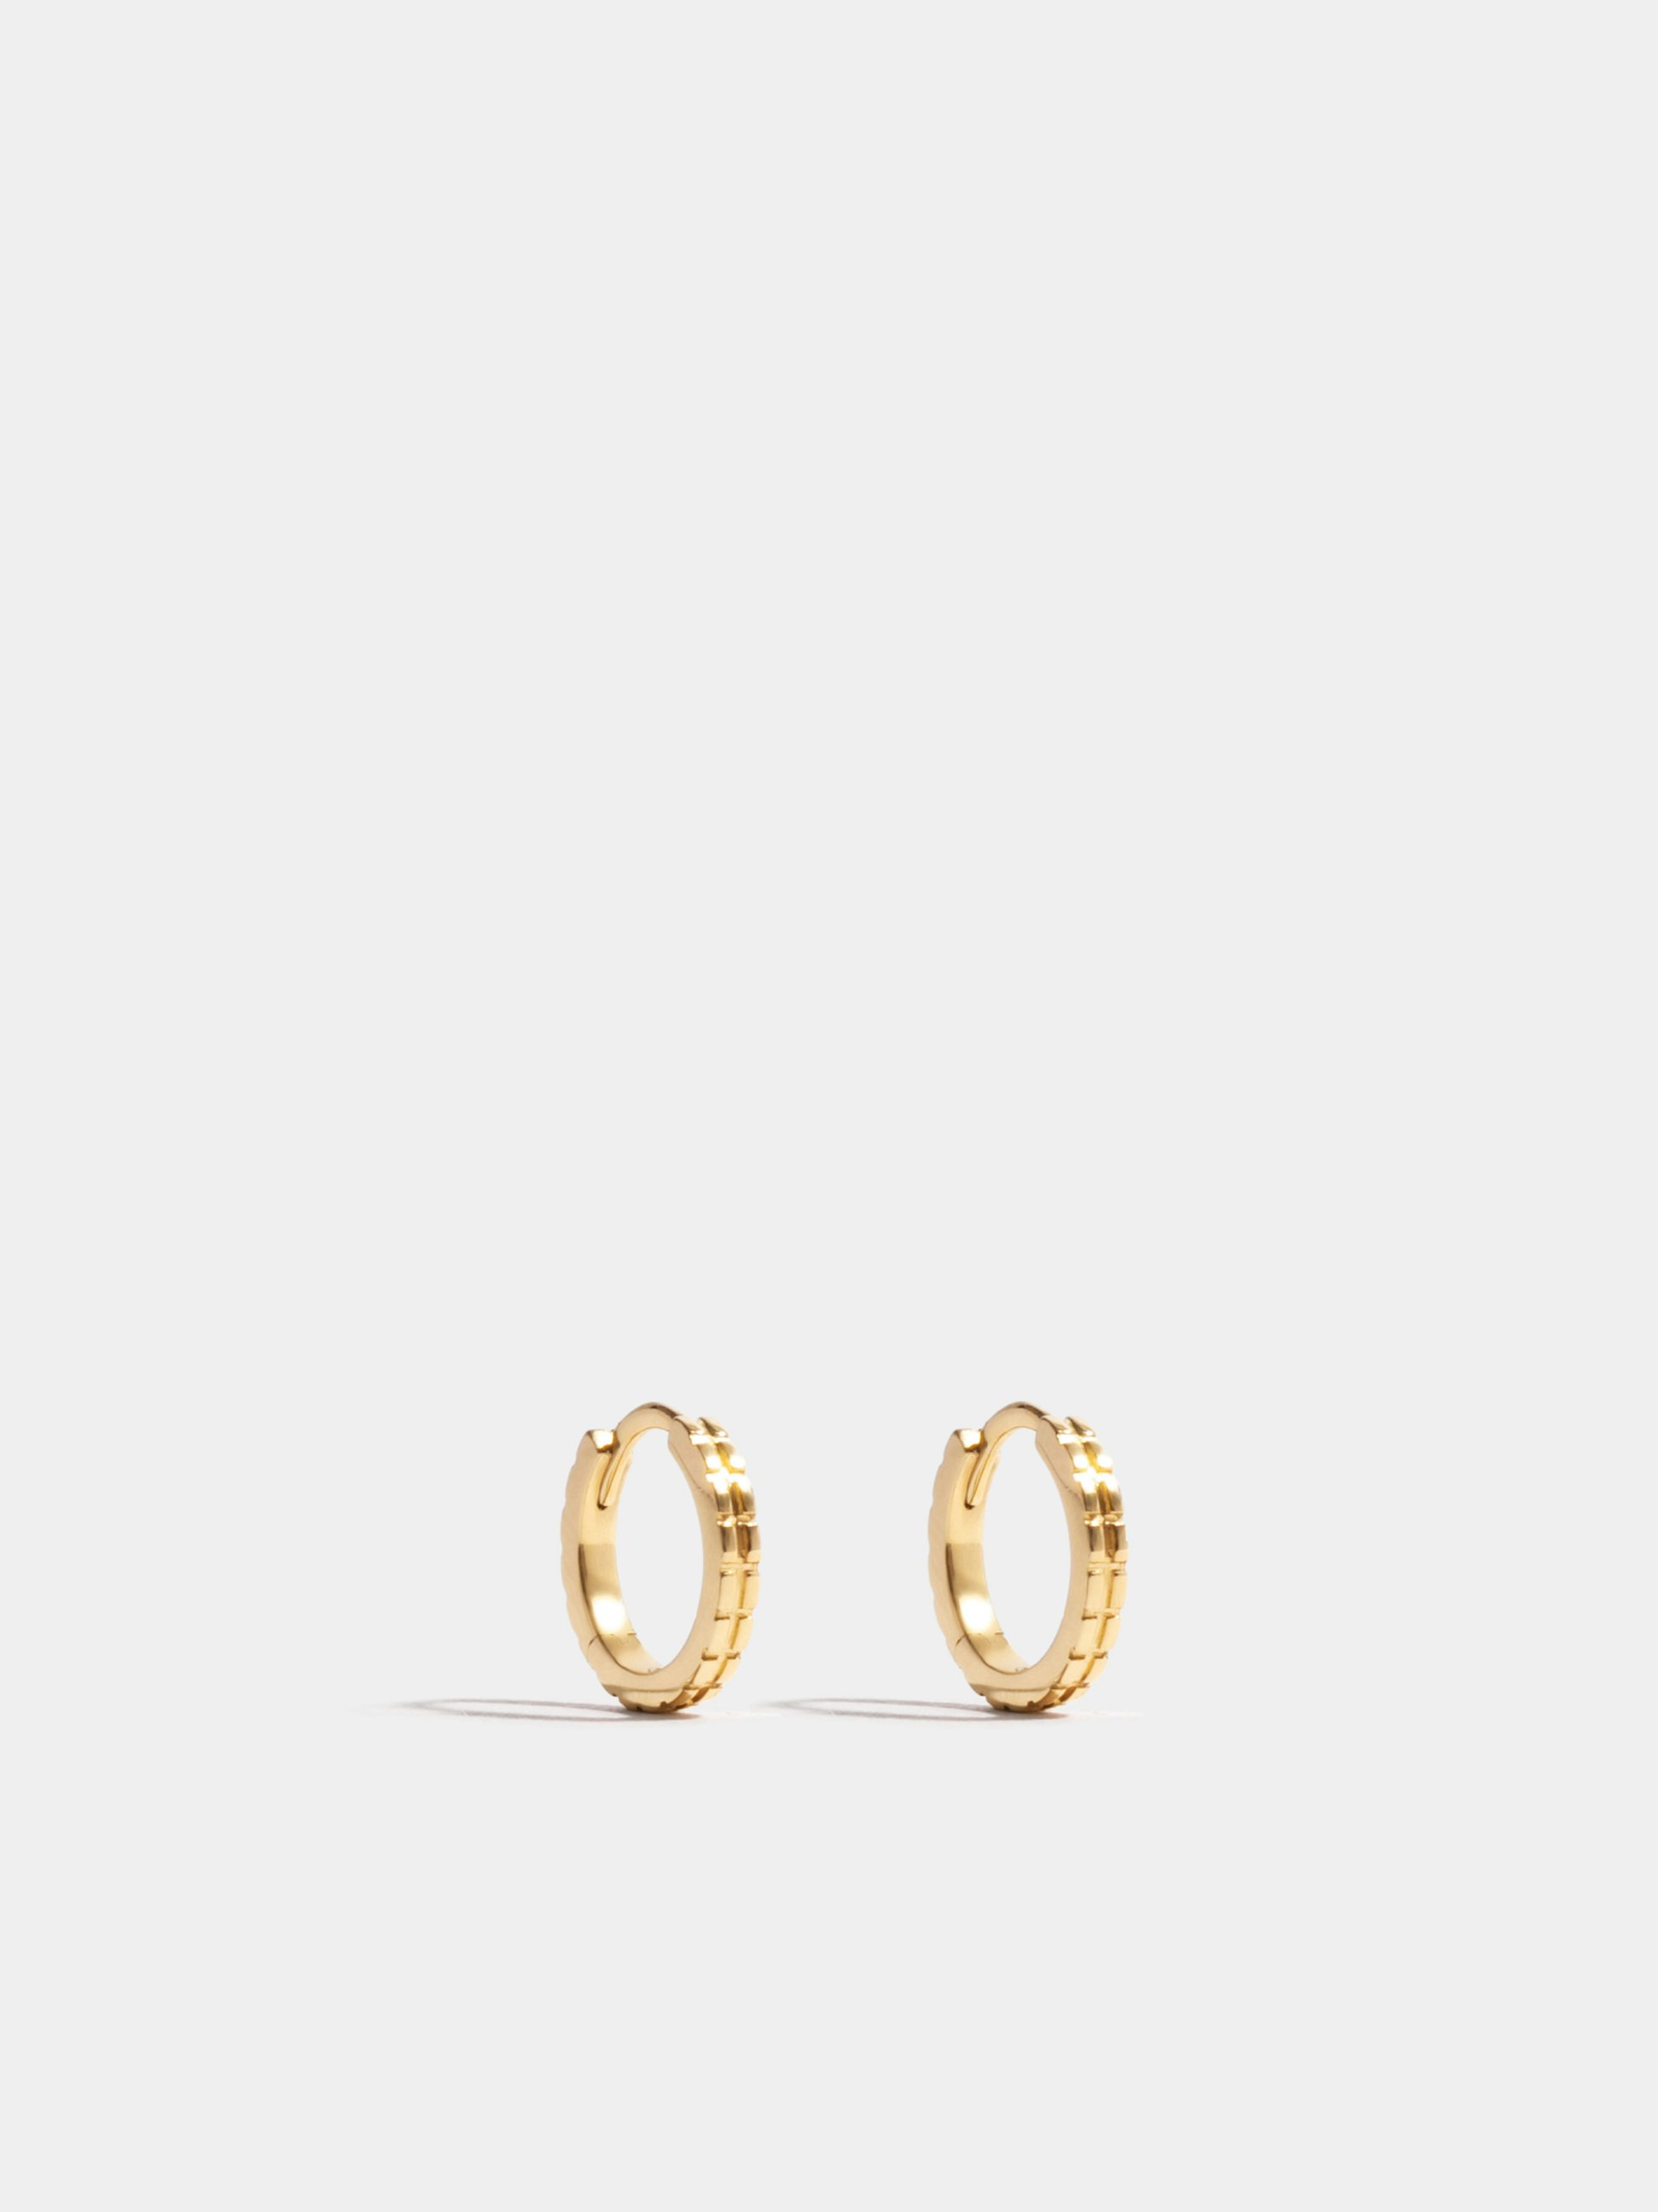 Anagramme "damier" earrings in yellow gold 18k Fairmined ethical